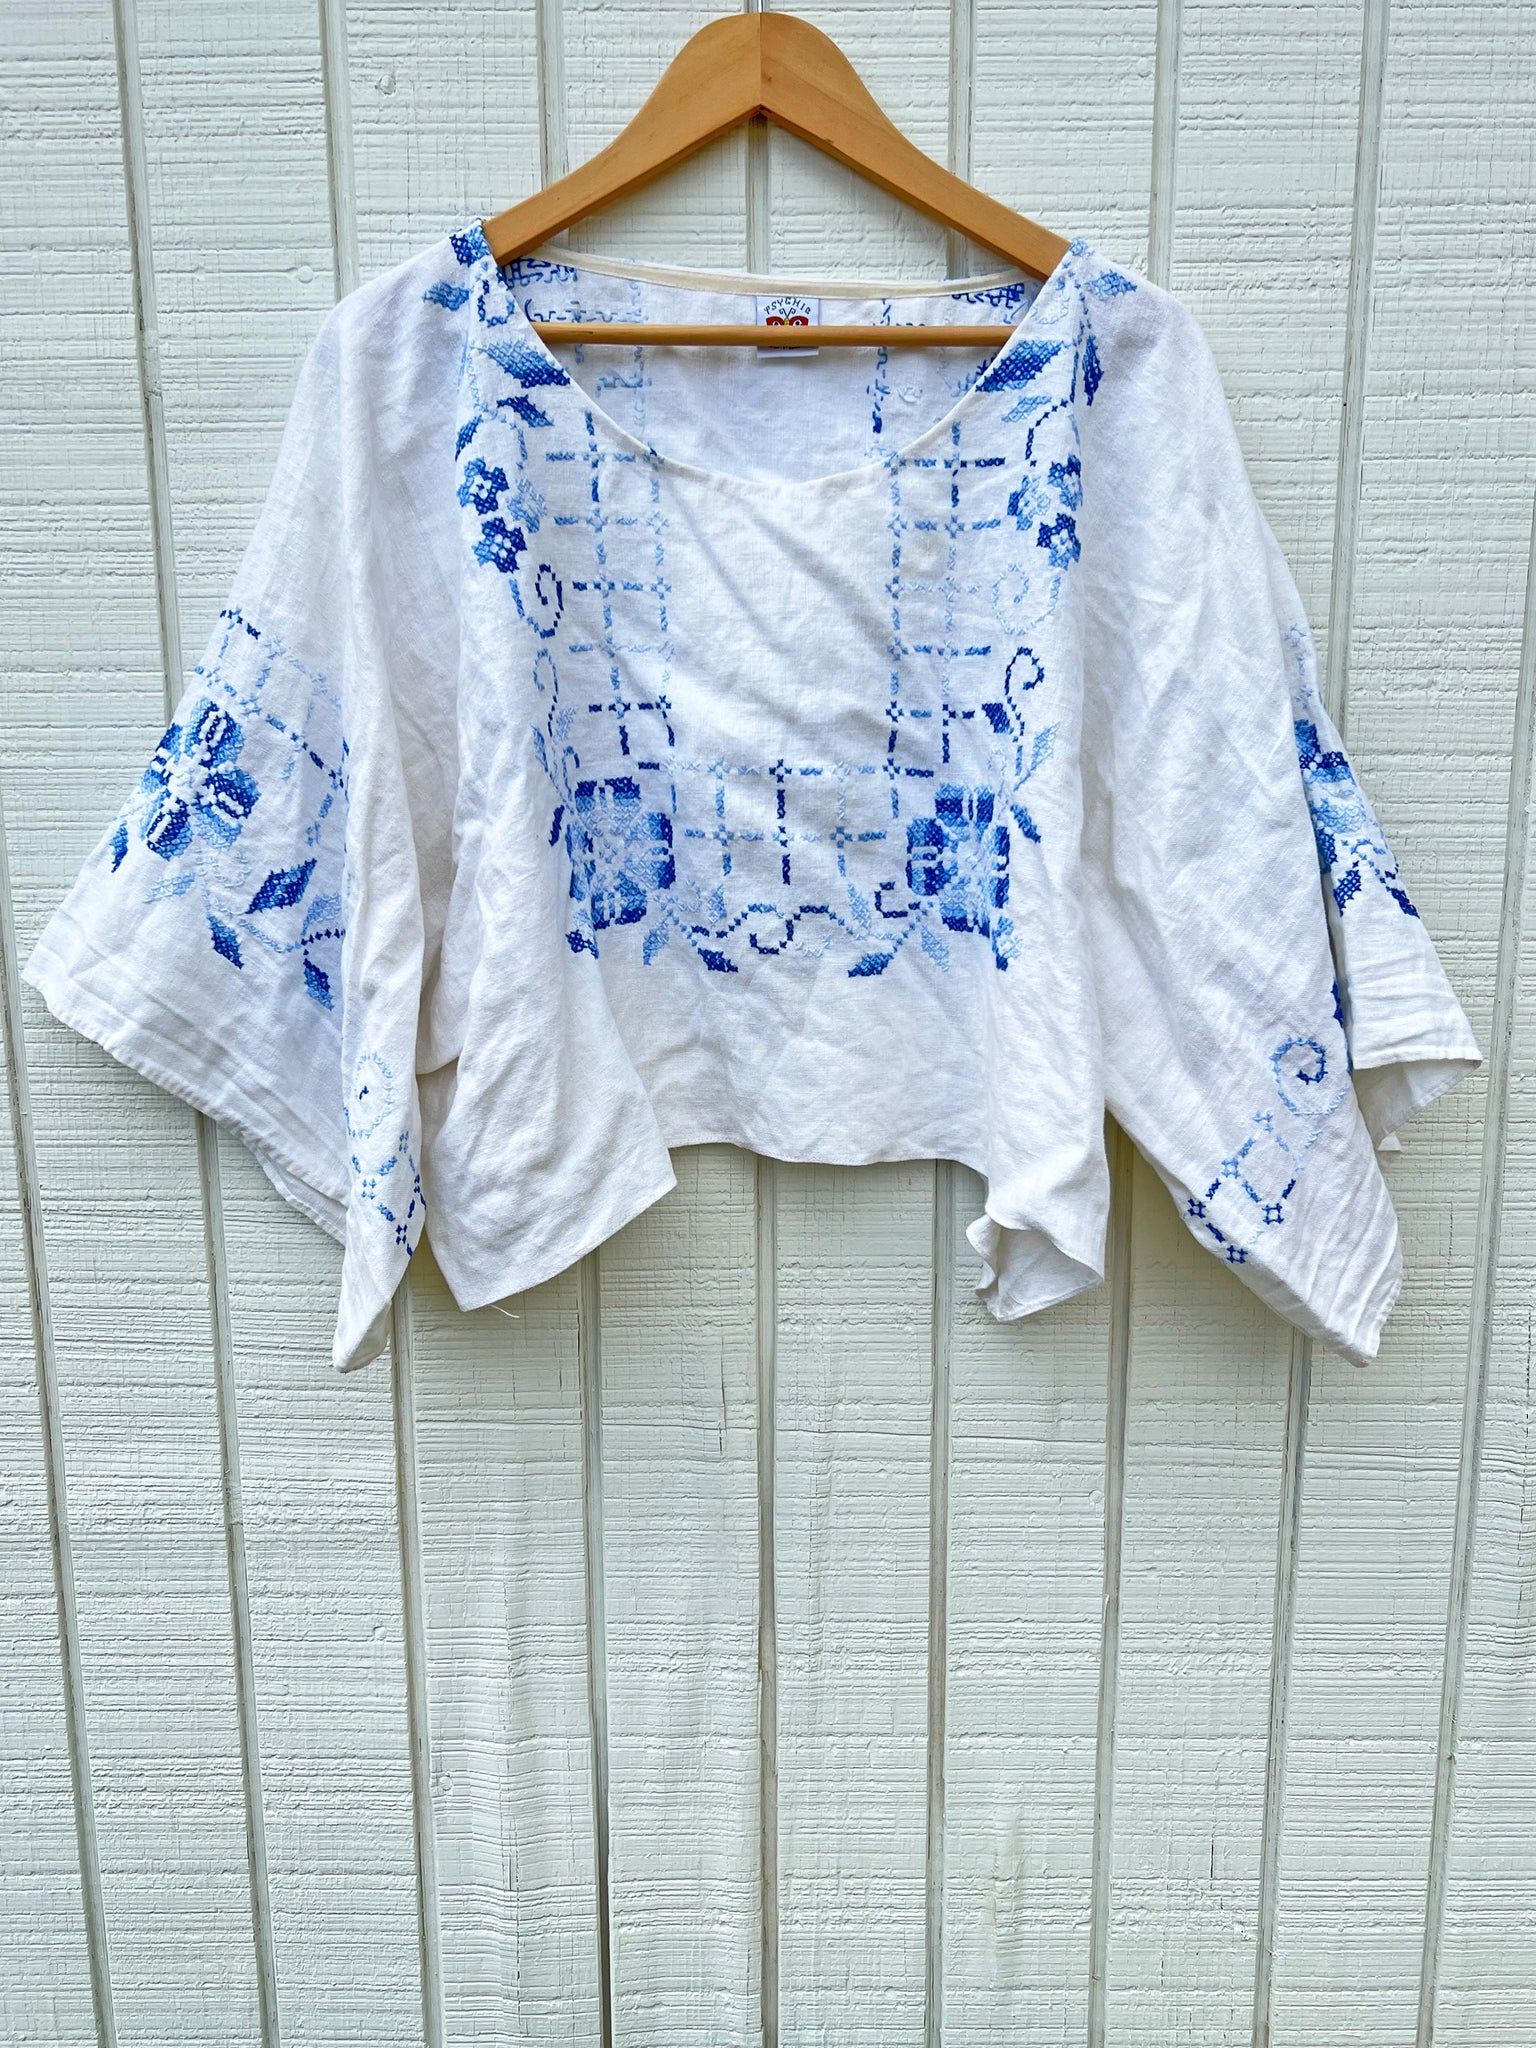 SAMPLE:  Psychic Outlaw Handmade Linen Stitch Top